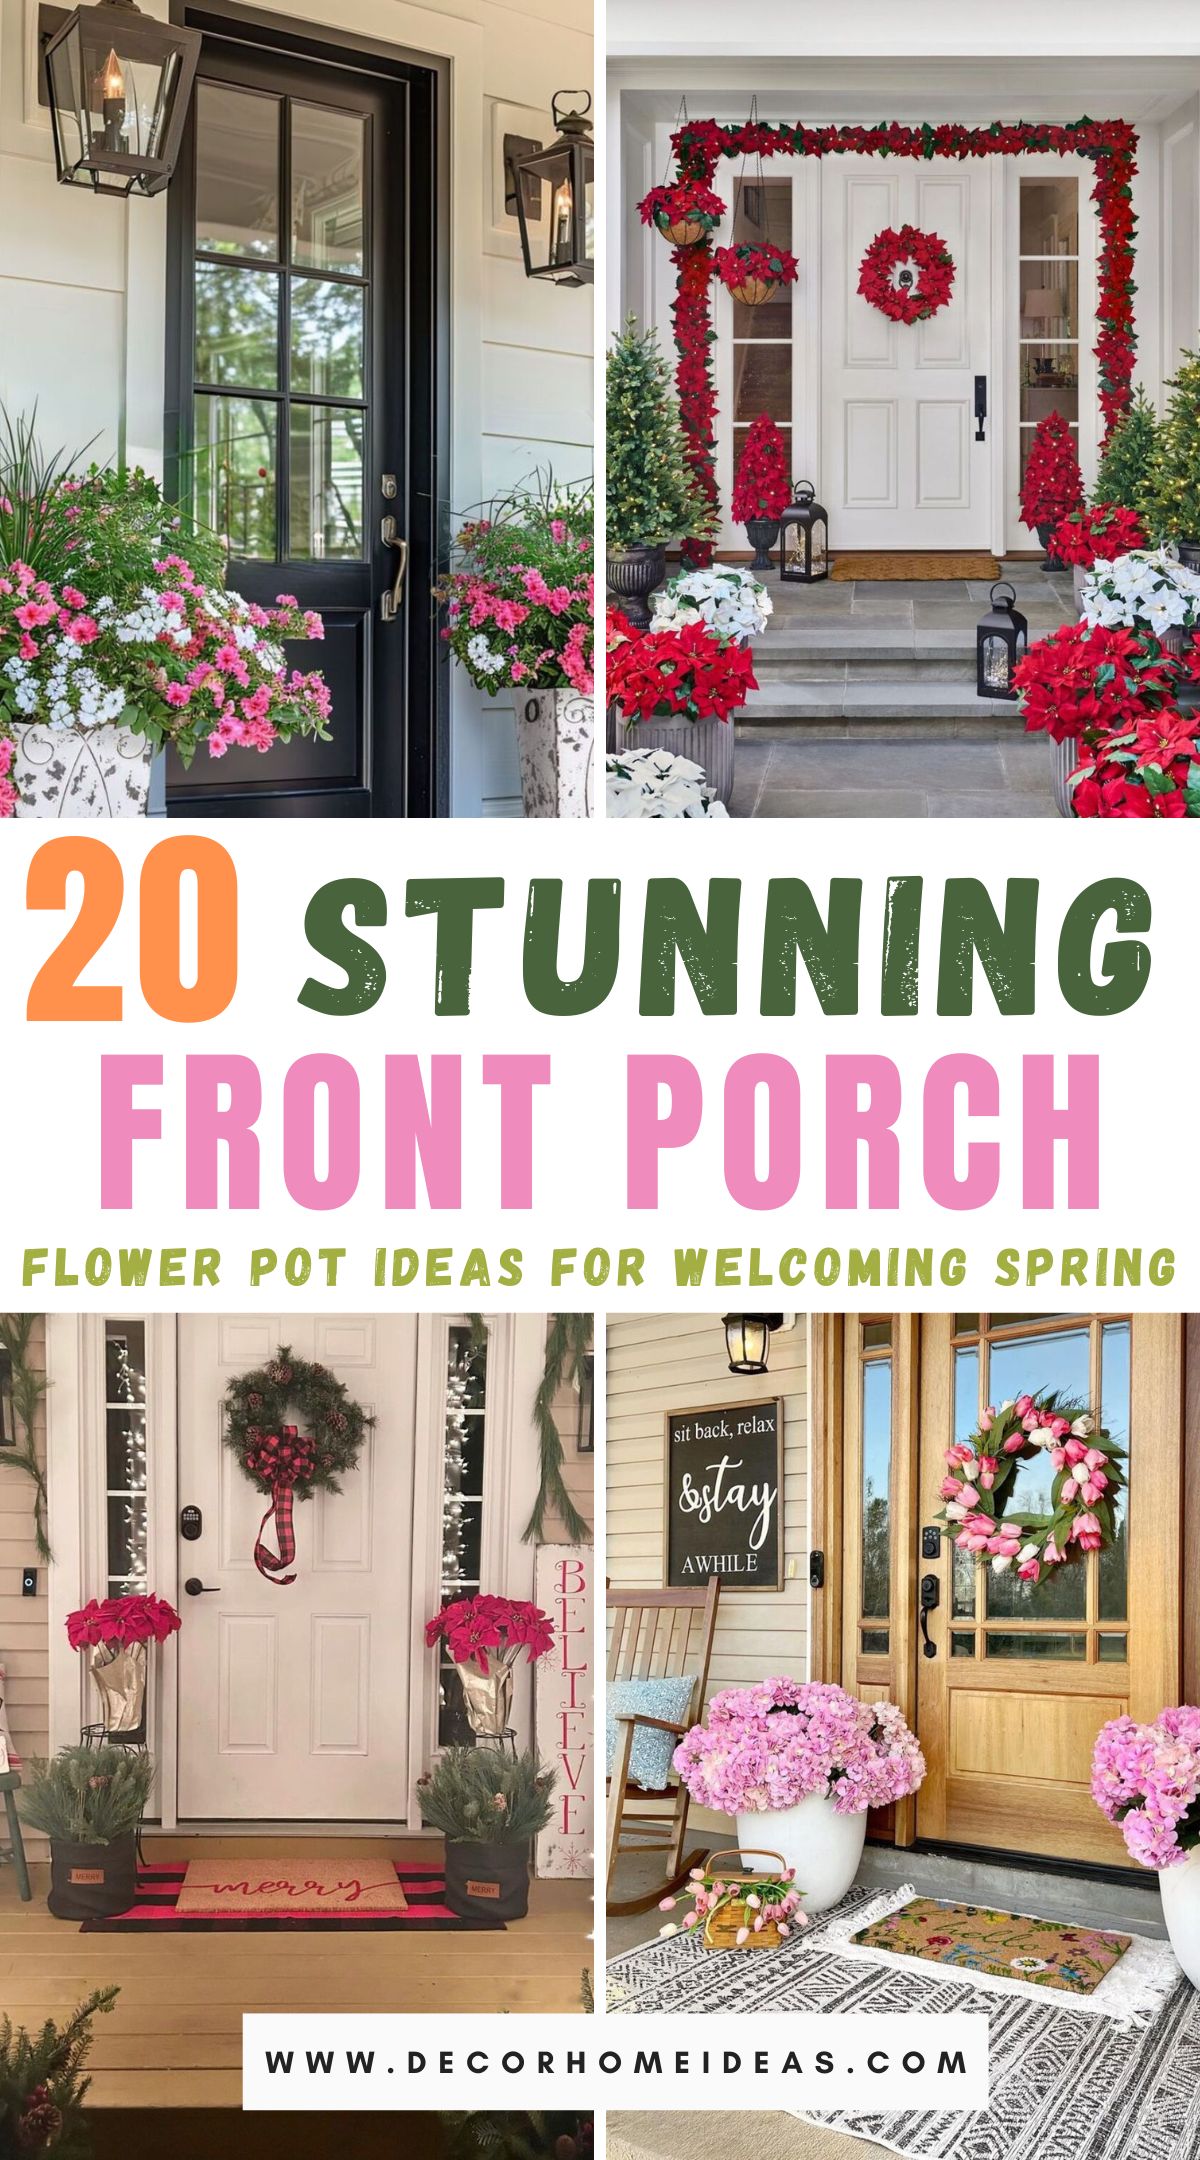 Enhance your home's curb appeal with these 20 stunning front porch flower pots. From colorful blooms to lush greenery, explore creative ideas to elevate your outdoor space and make a welcoming statement for guests and passersby alike.